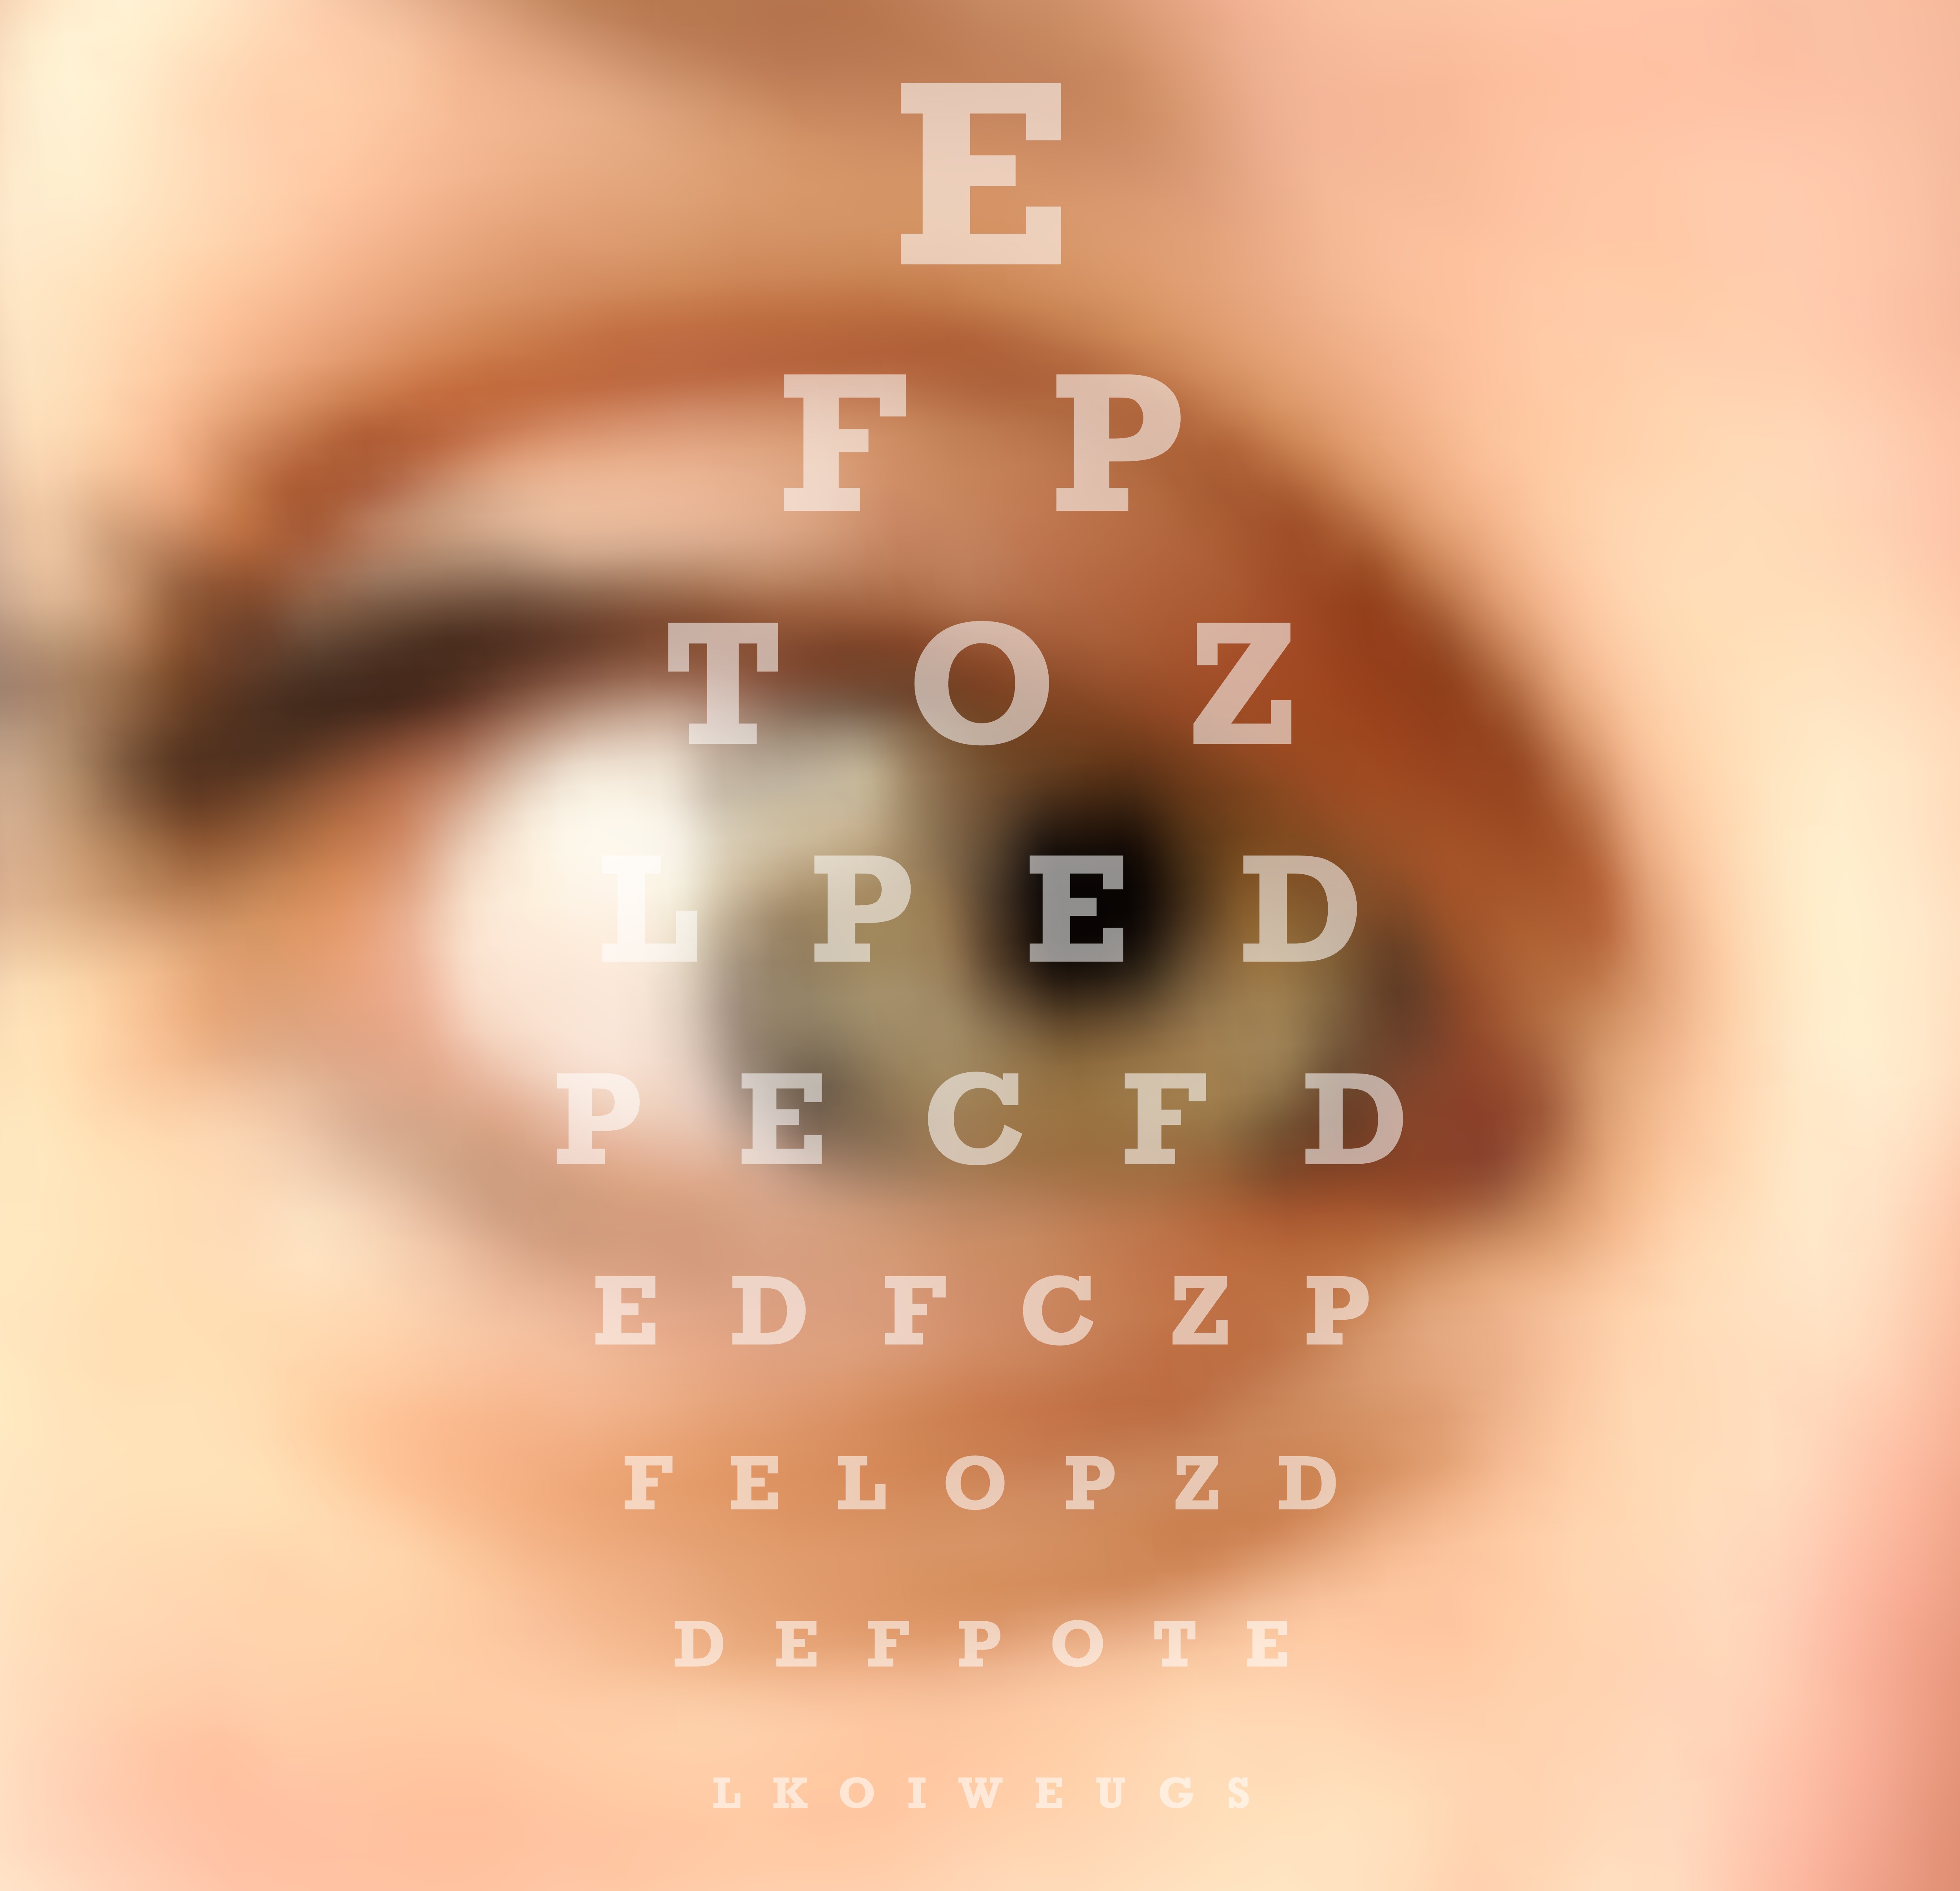 An eye chart superimposed on an image of an eye